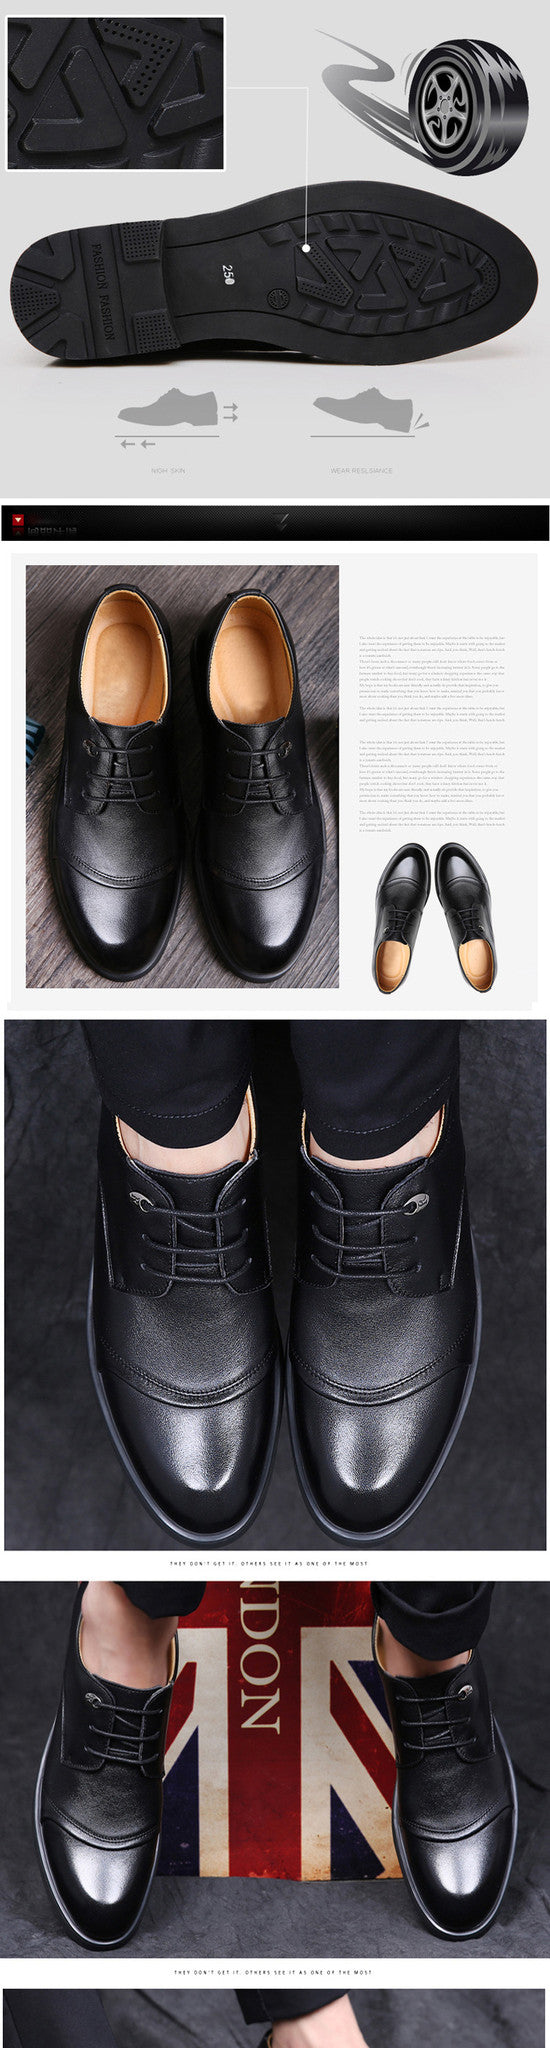 Soft Pointed Toe Classic Fashion Business Oxford Shoes For Men Loafers 2017 - women shoes - 99fab.com